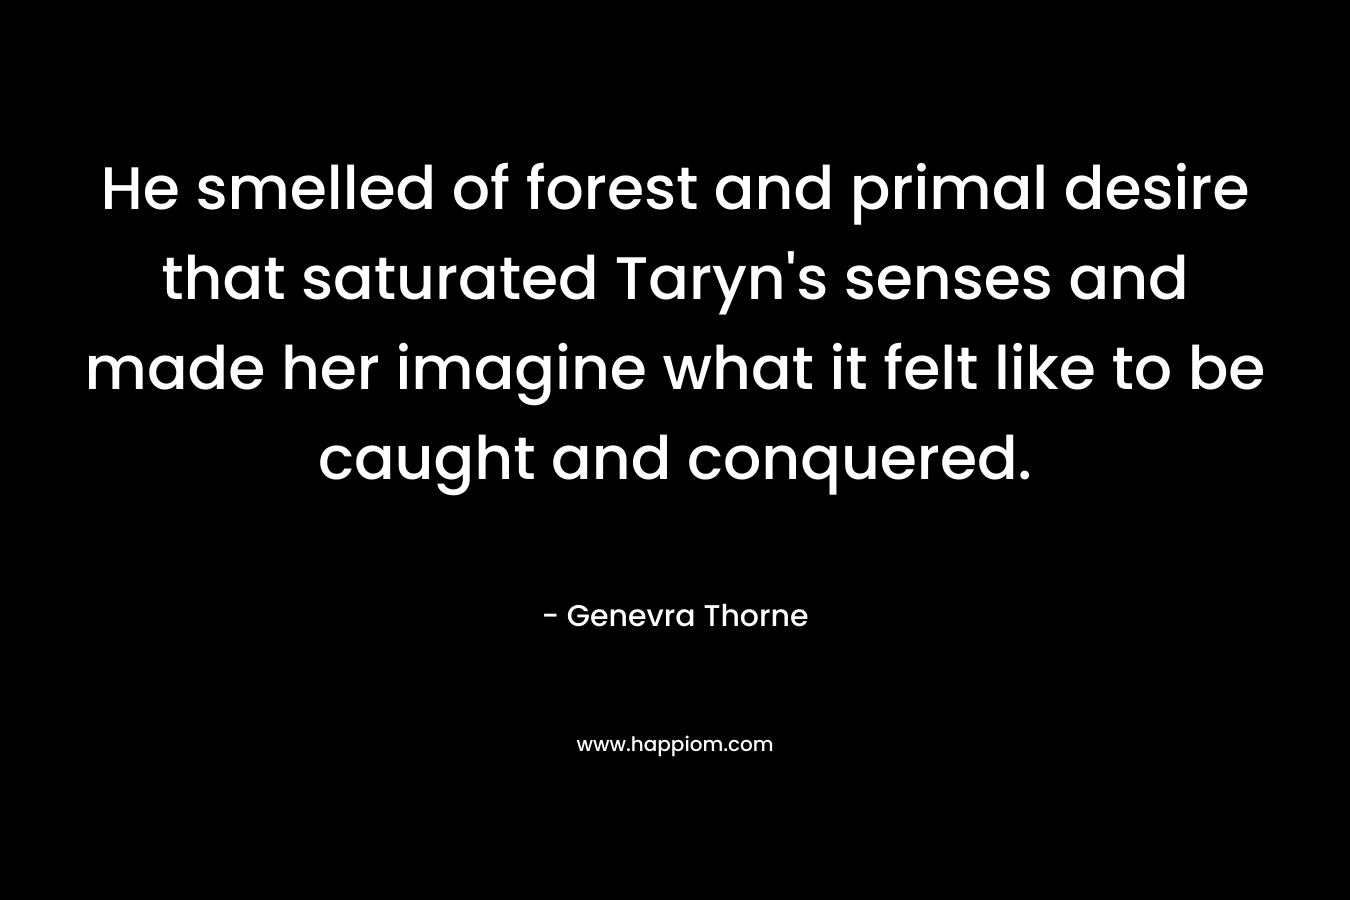 He smelled of forest and primal desire that saturated Taryn's senses and made her imagine what it felt like to be caught and conquered.